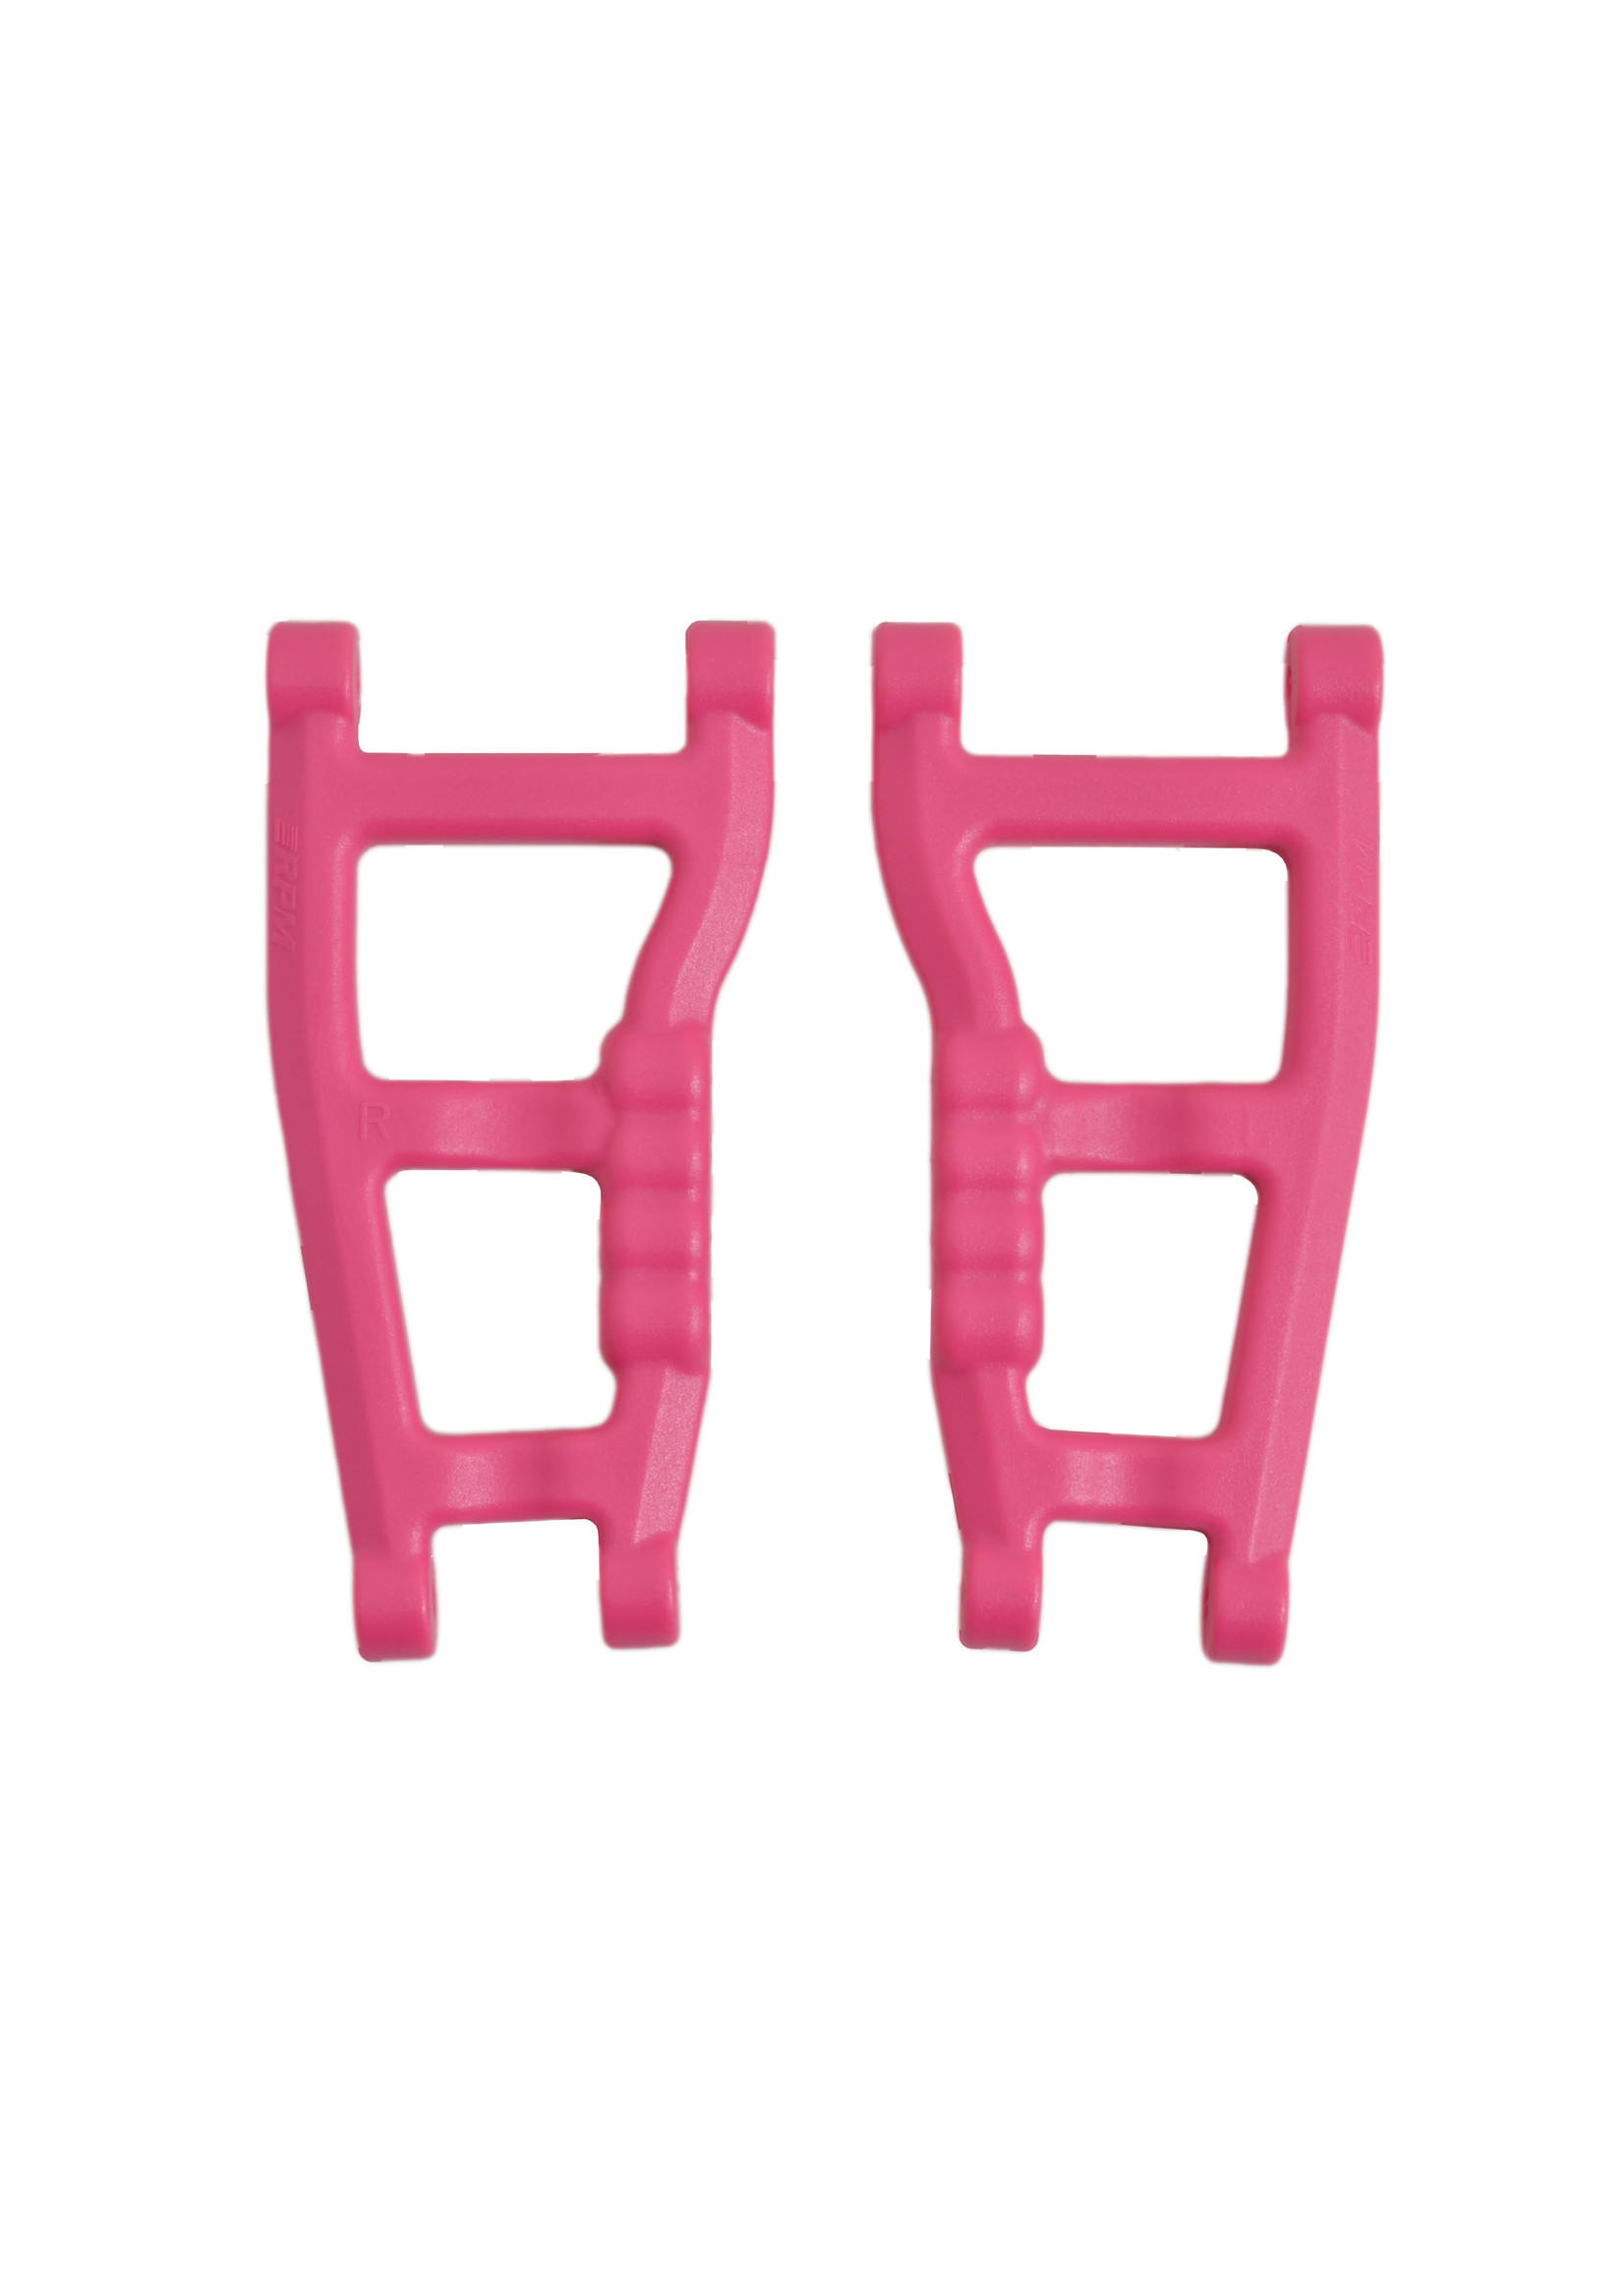 RPM RPM80597 RPM Rear A-Arms, for Traxxas Slash 2wd, Pink